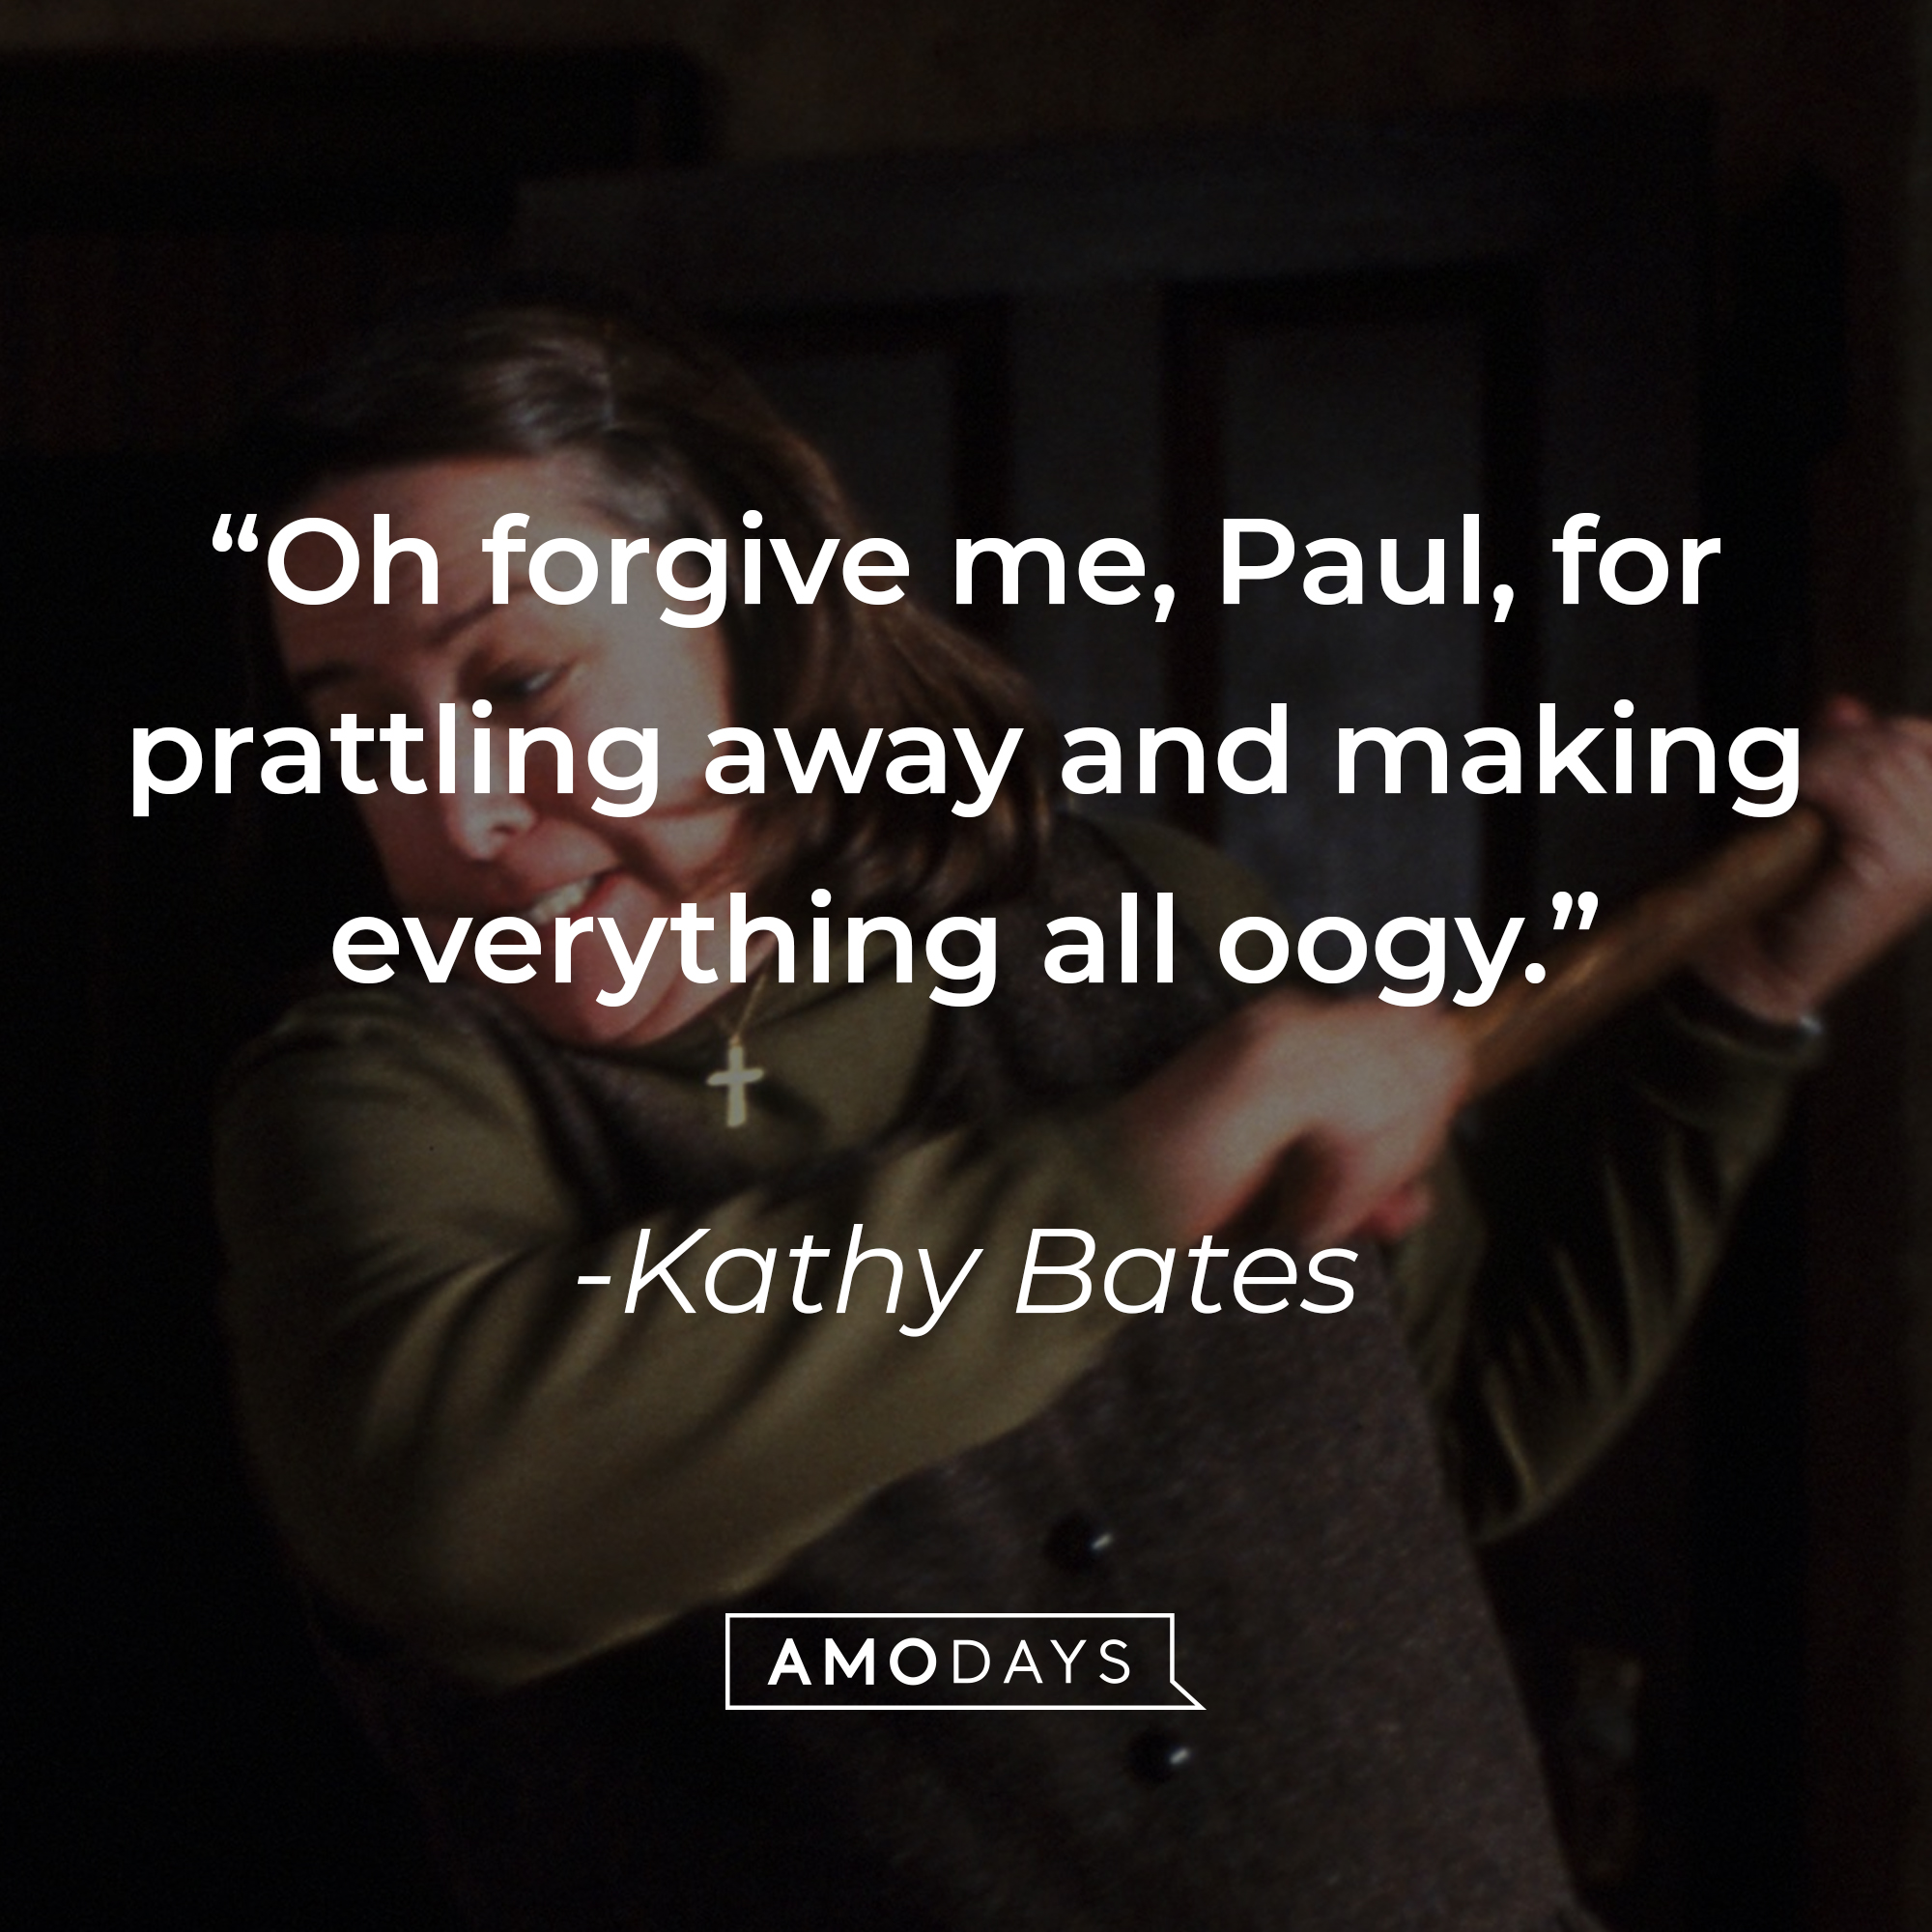 Annie Wilkes' quote: “Oh forgive me, Paul, for prattling away and making everything all oogy.” | Source: facebook.com/MiseryMovie